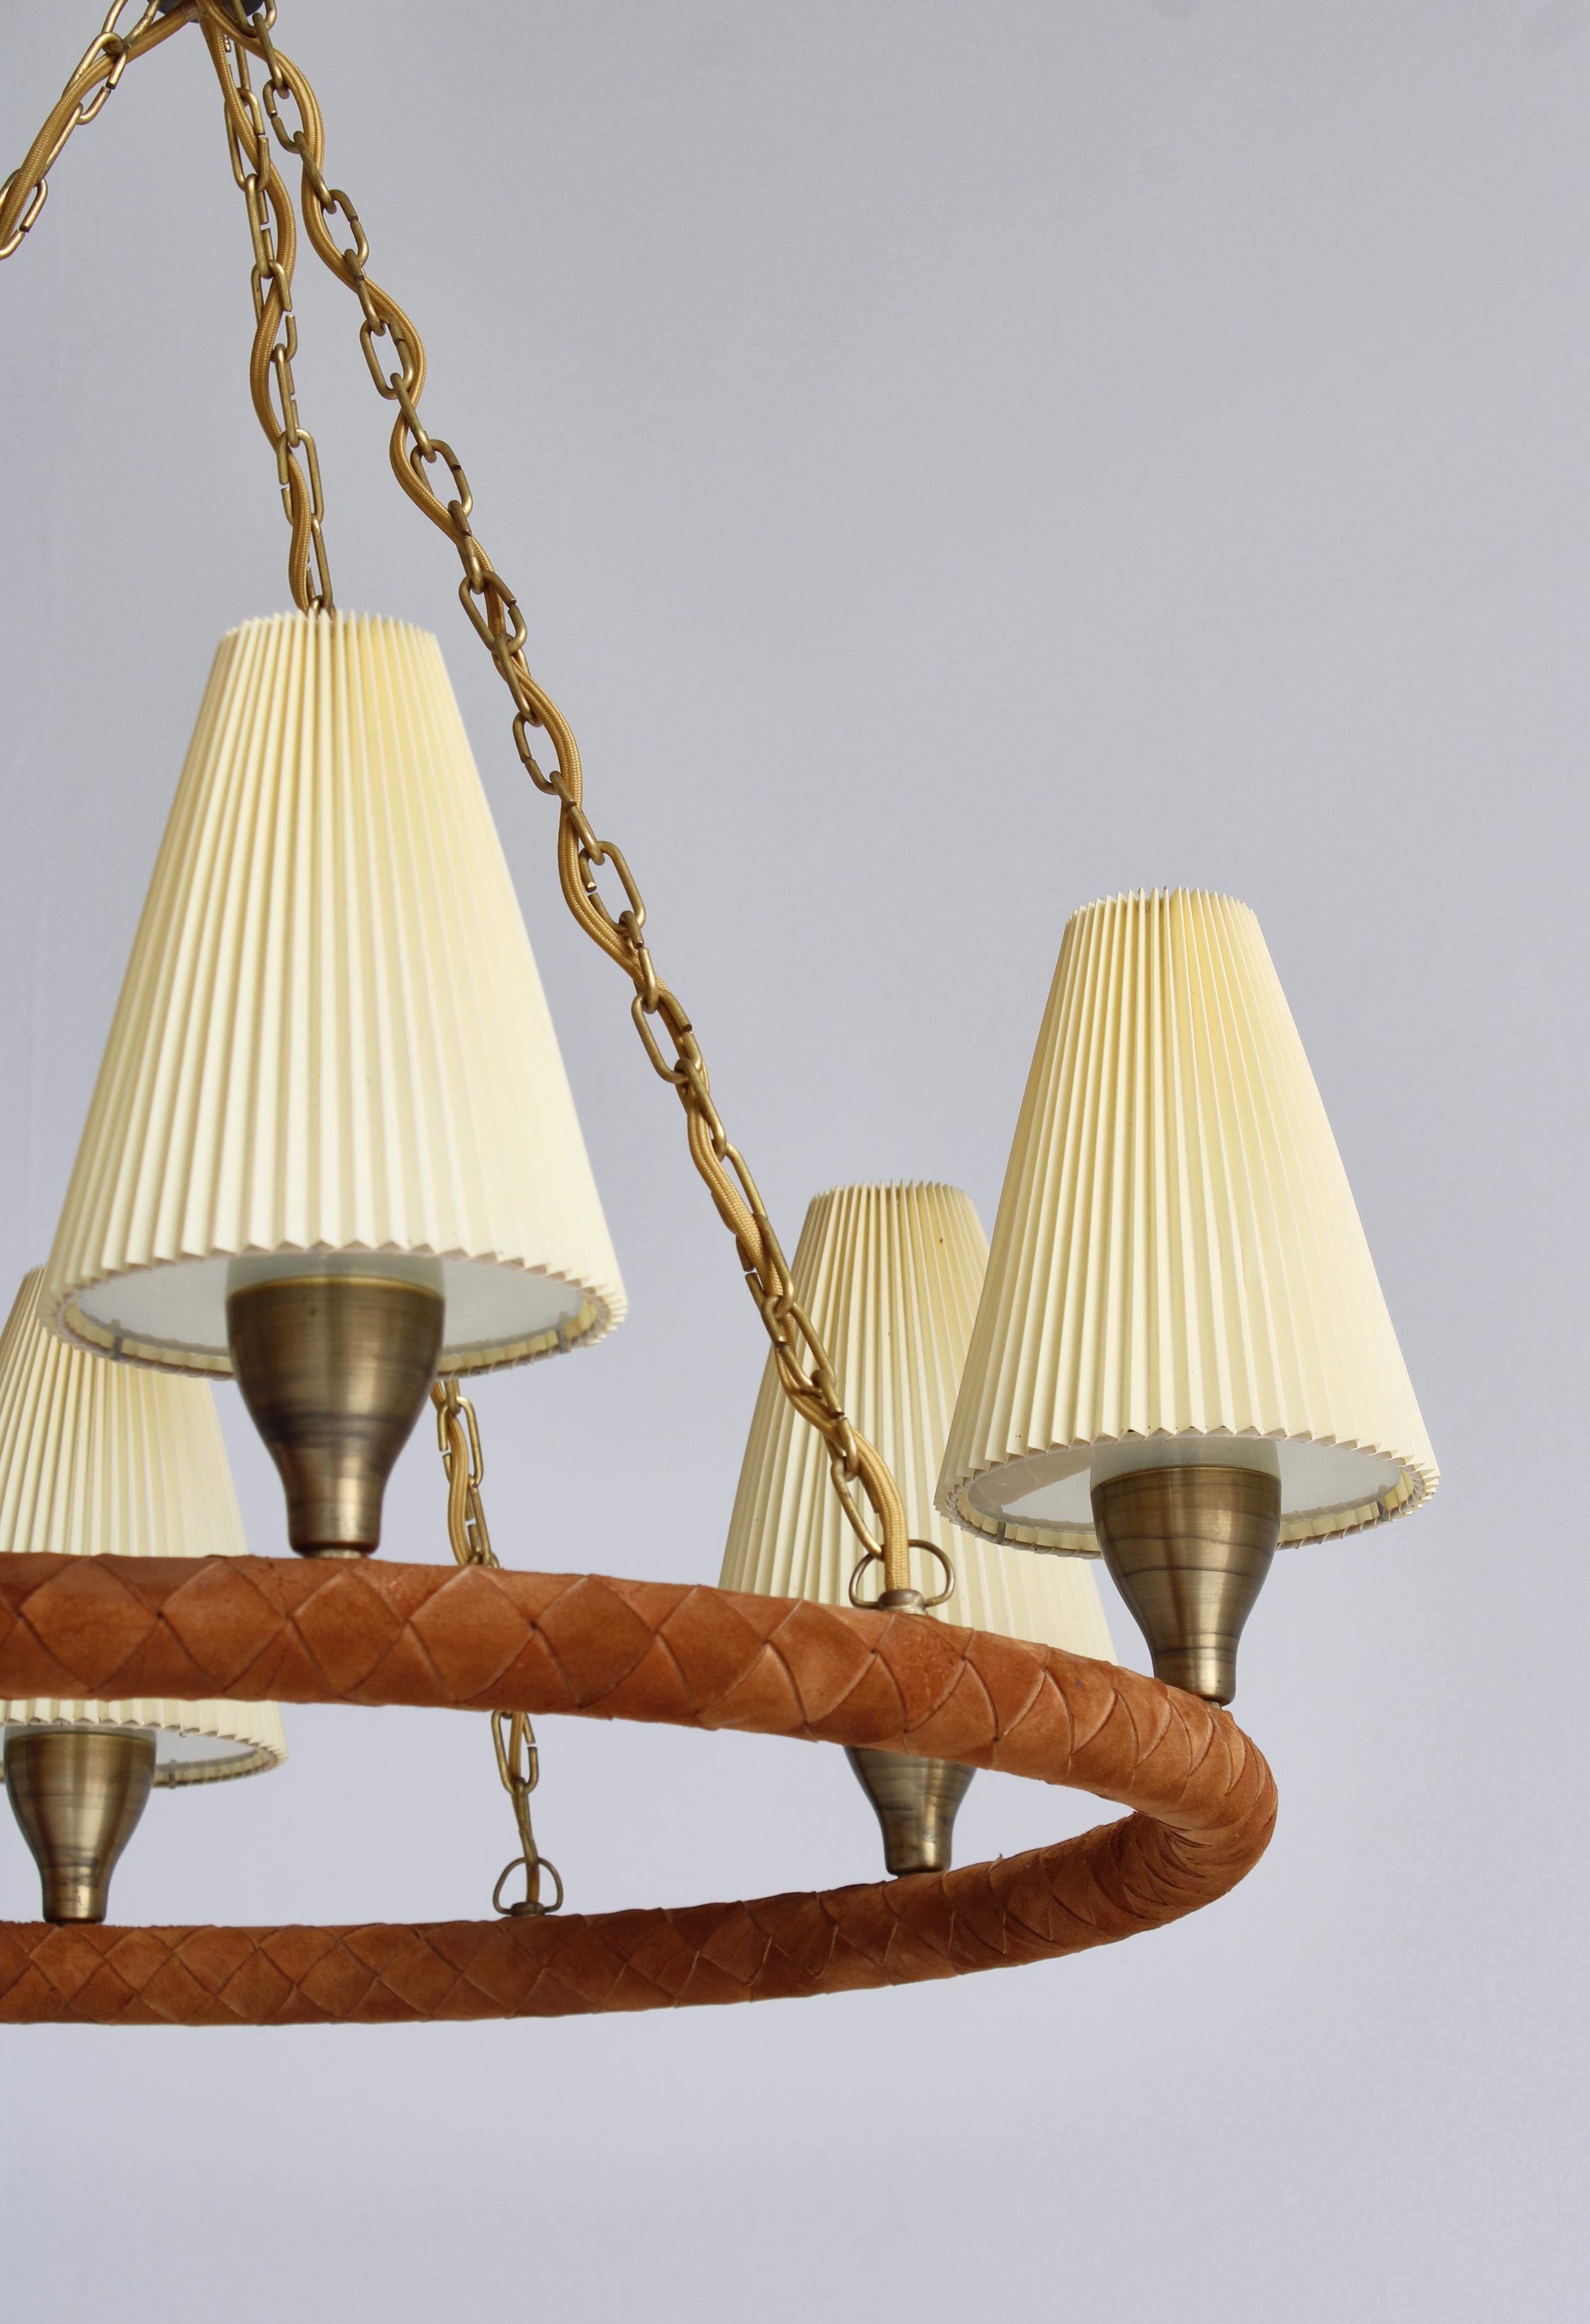 Danish Modern Chandelier in Leather, Brass and Glass by LYFA, Denmark, 1940s For Sale 10